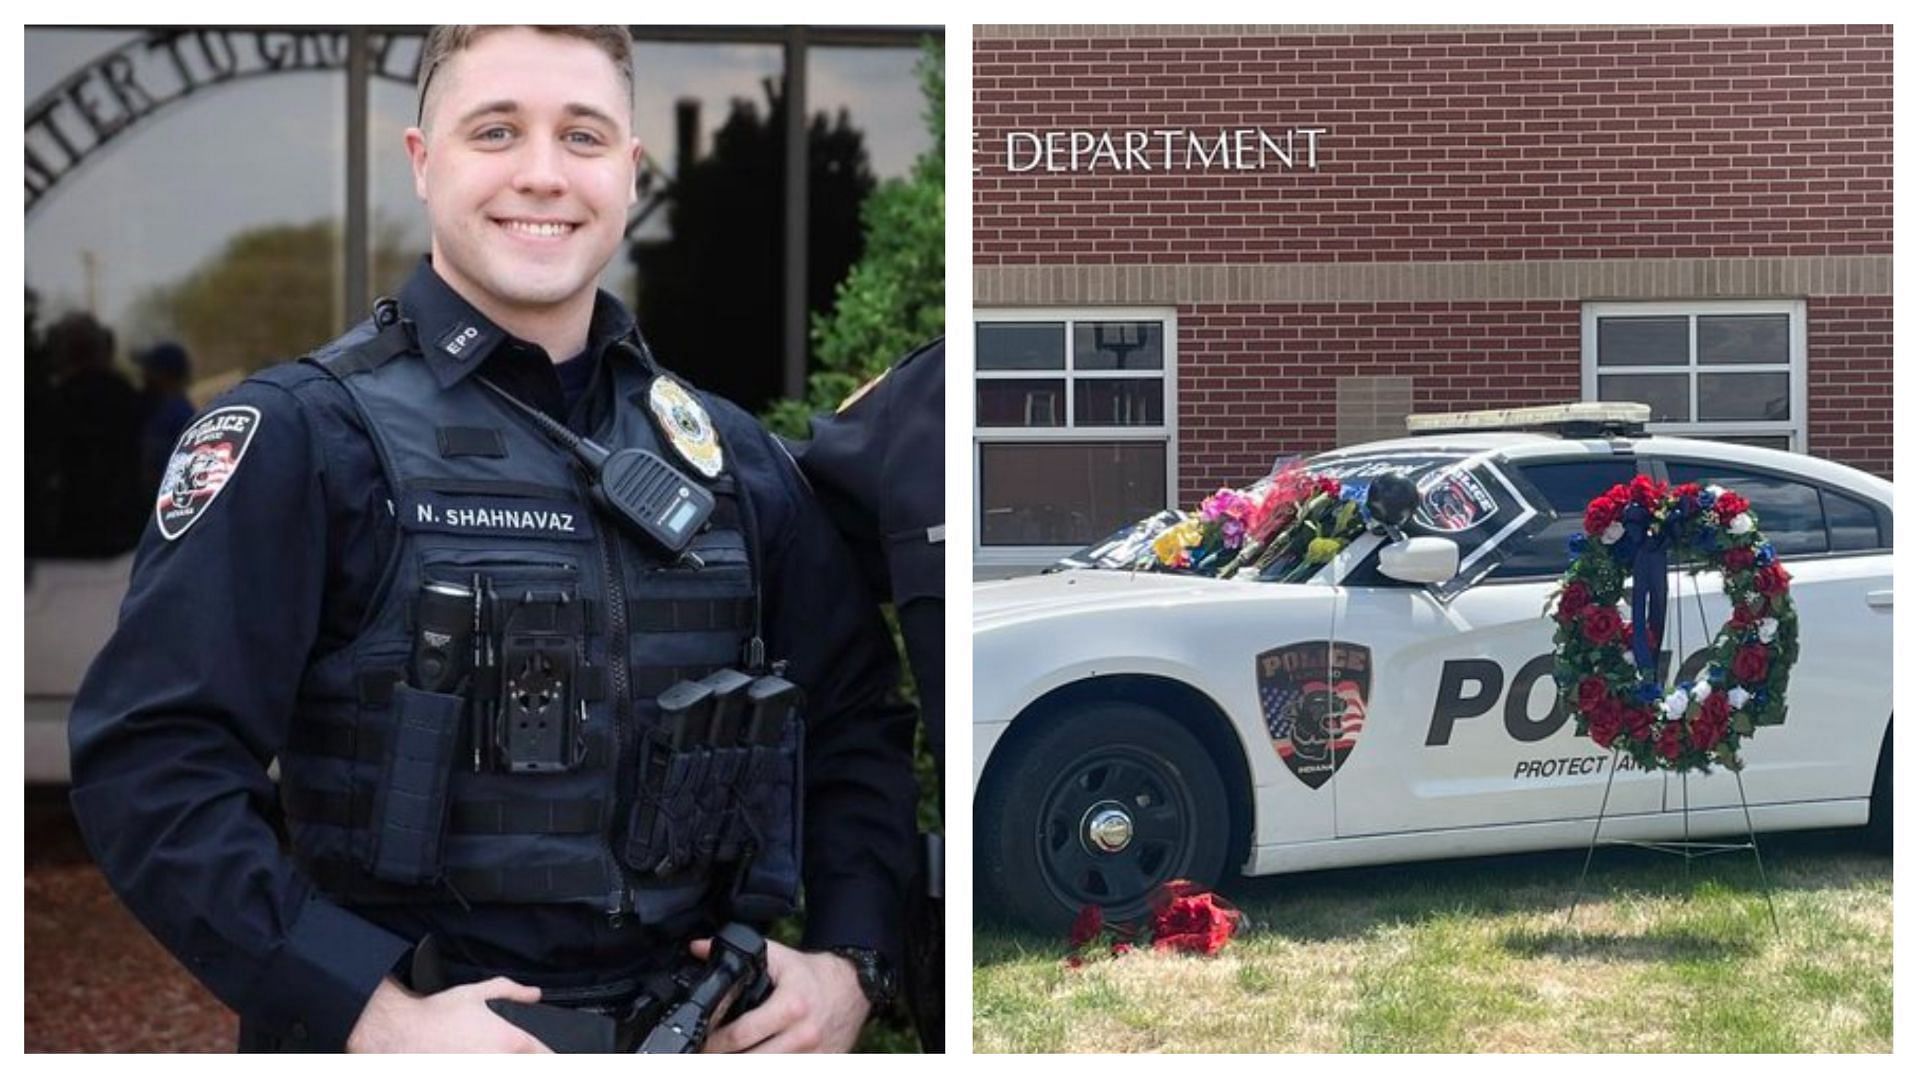 Indiana police officer Noah Shahnavaz was shot to death during a traffic stop (Image via Twitter/Sgt.TonySlocum/IndianaLawEnforcementAcademy)